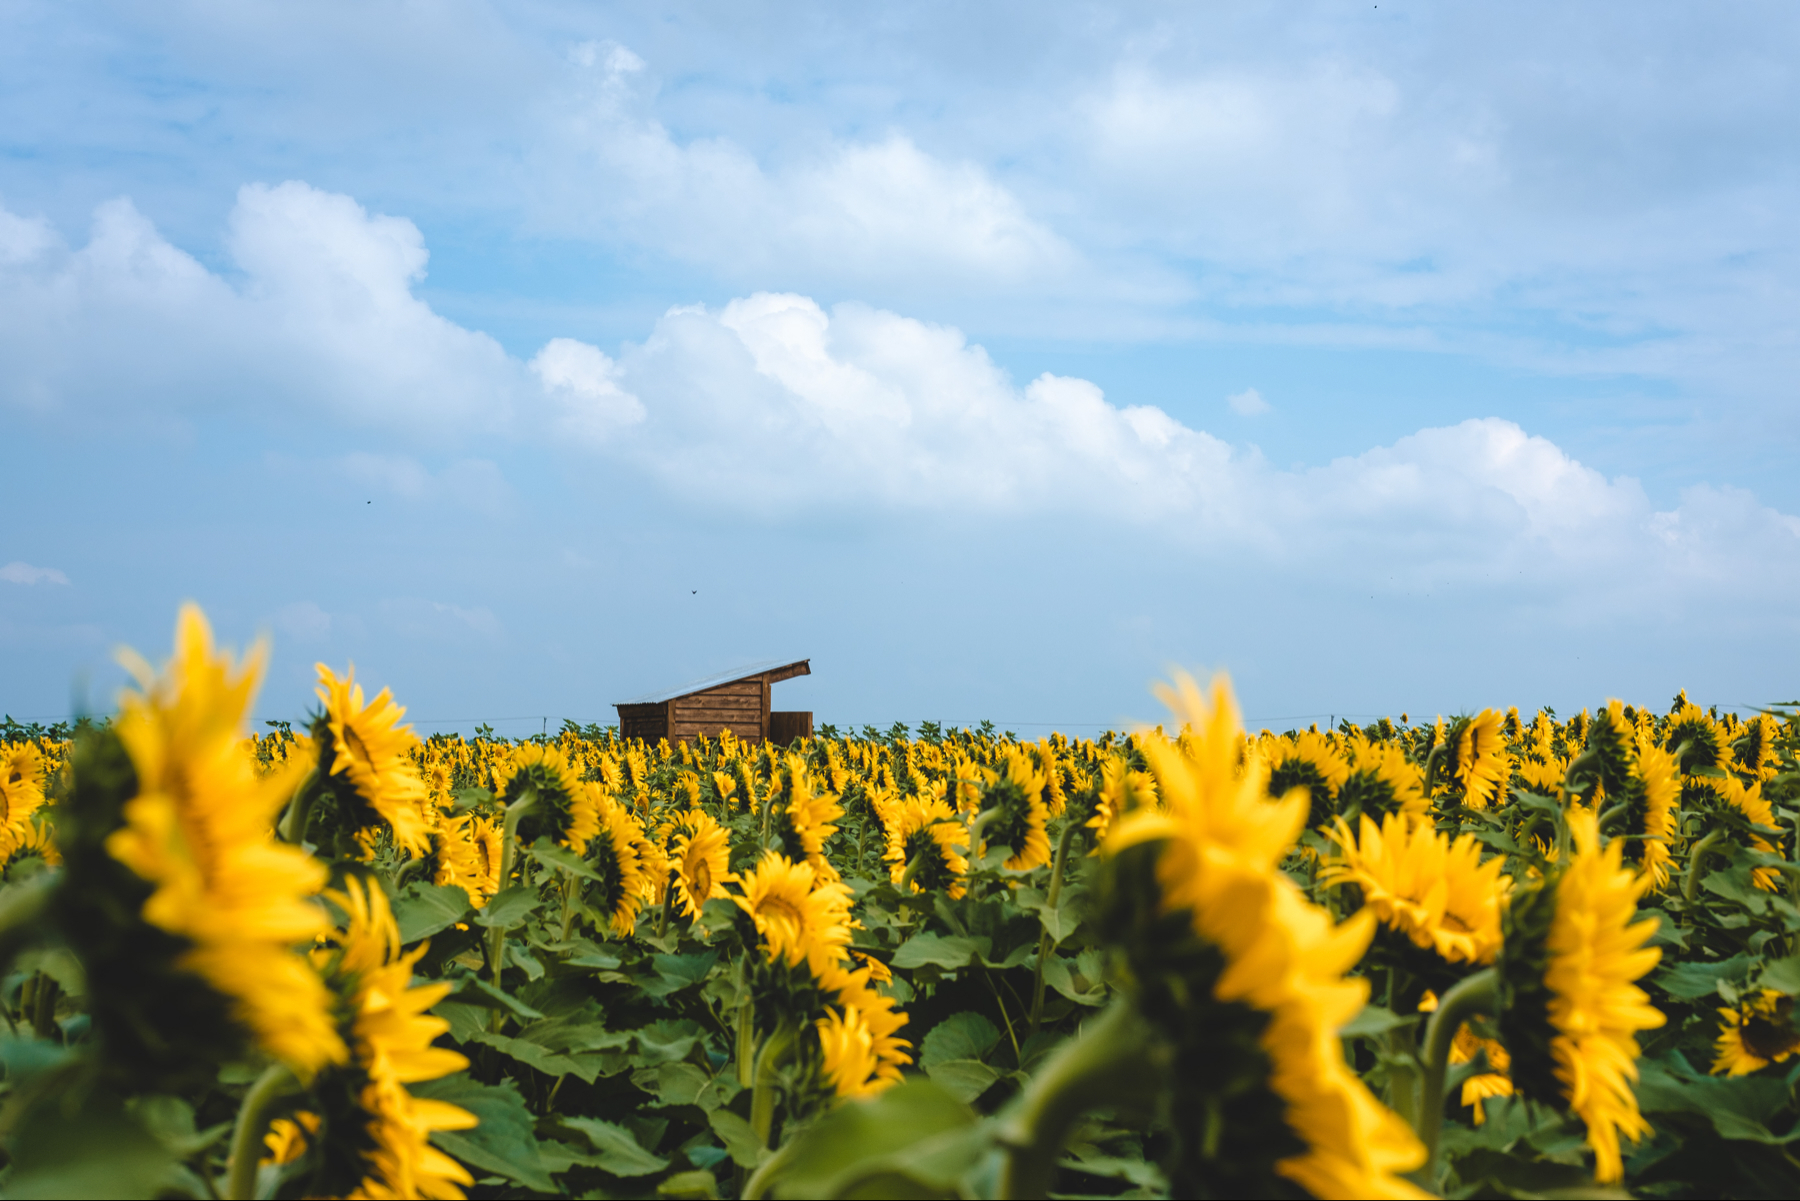 A field of sunflowers under a blue sky with white clouds, with a small wooden structure in the background.